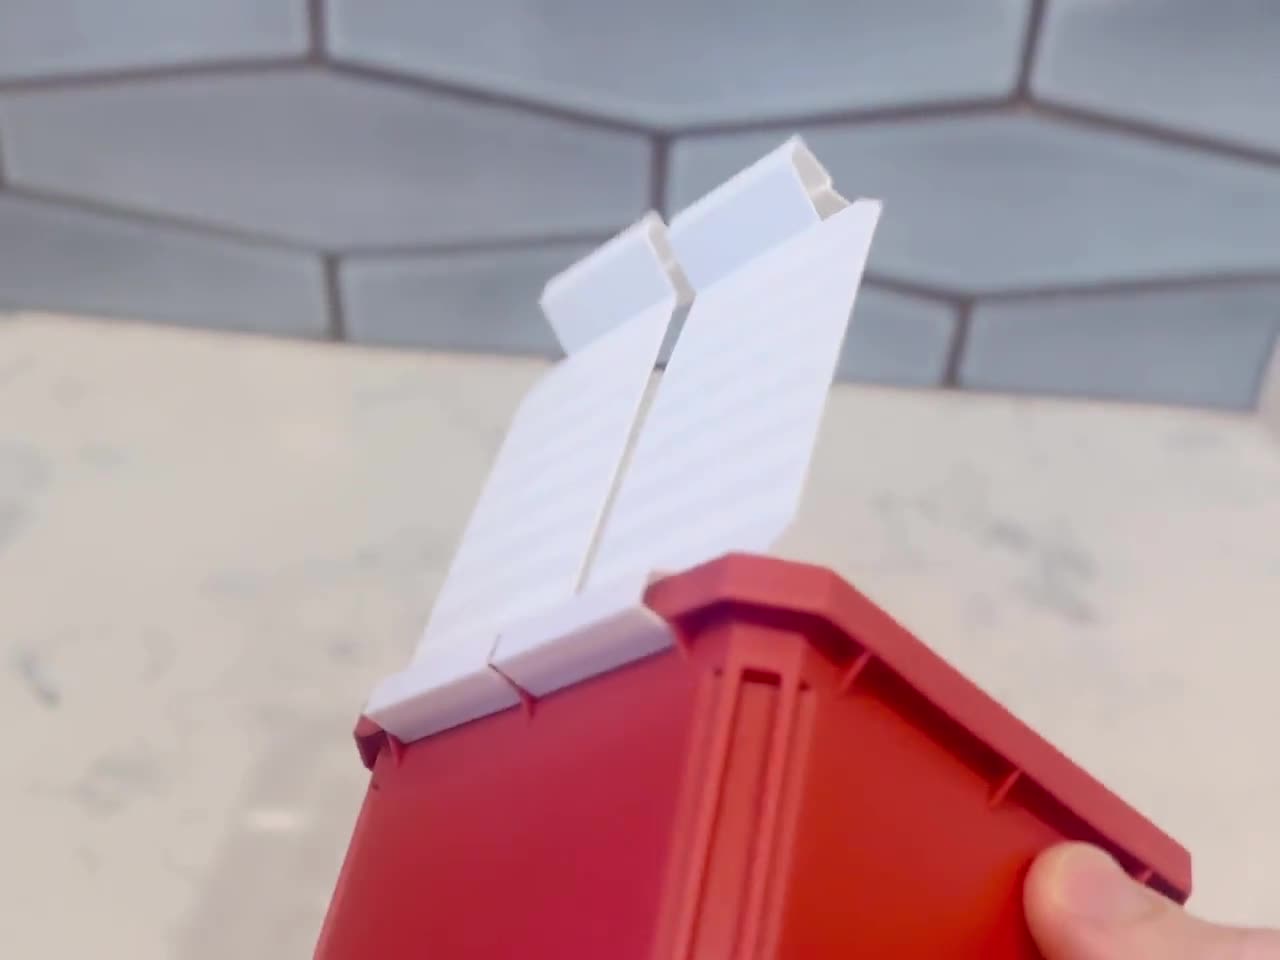 3D Printed Milwaukee Packout Tall Square Bin Lids 